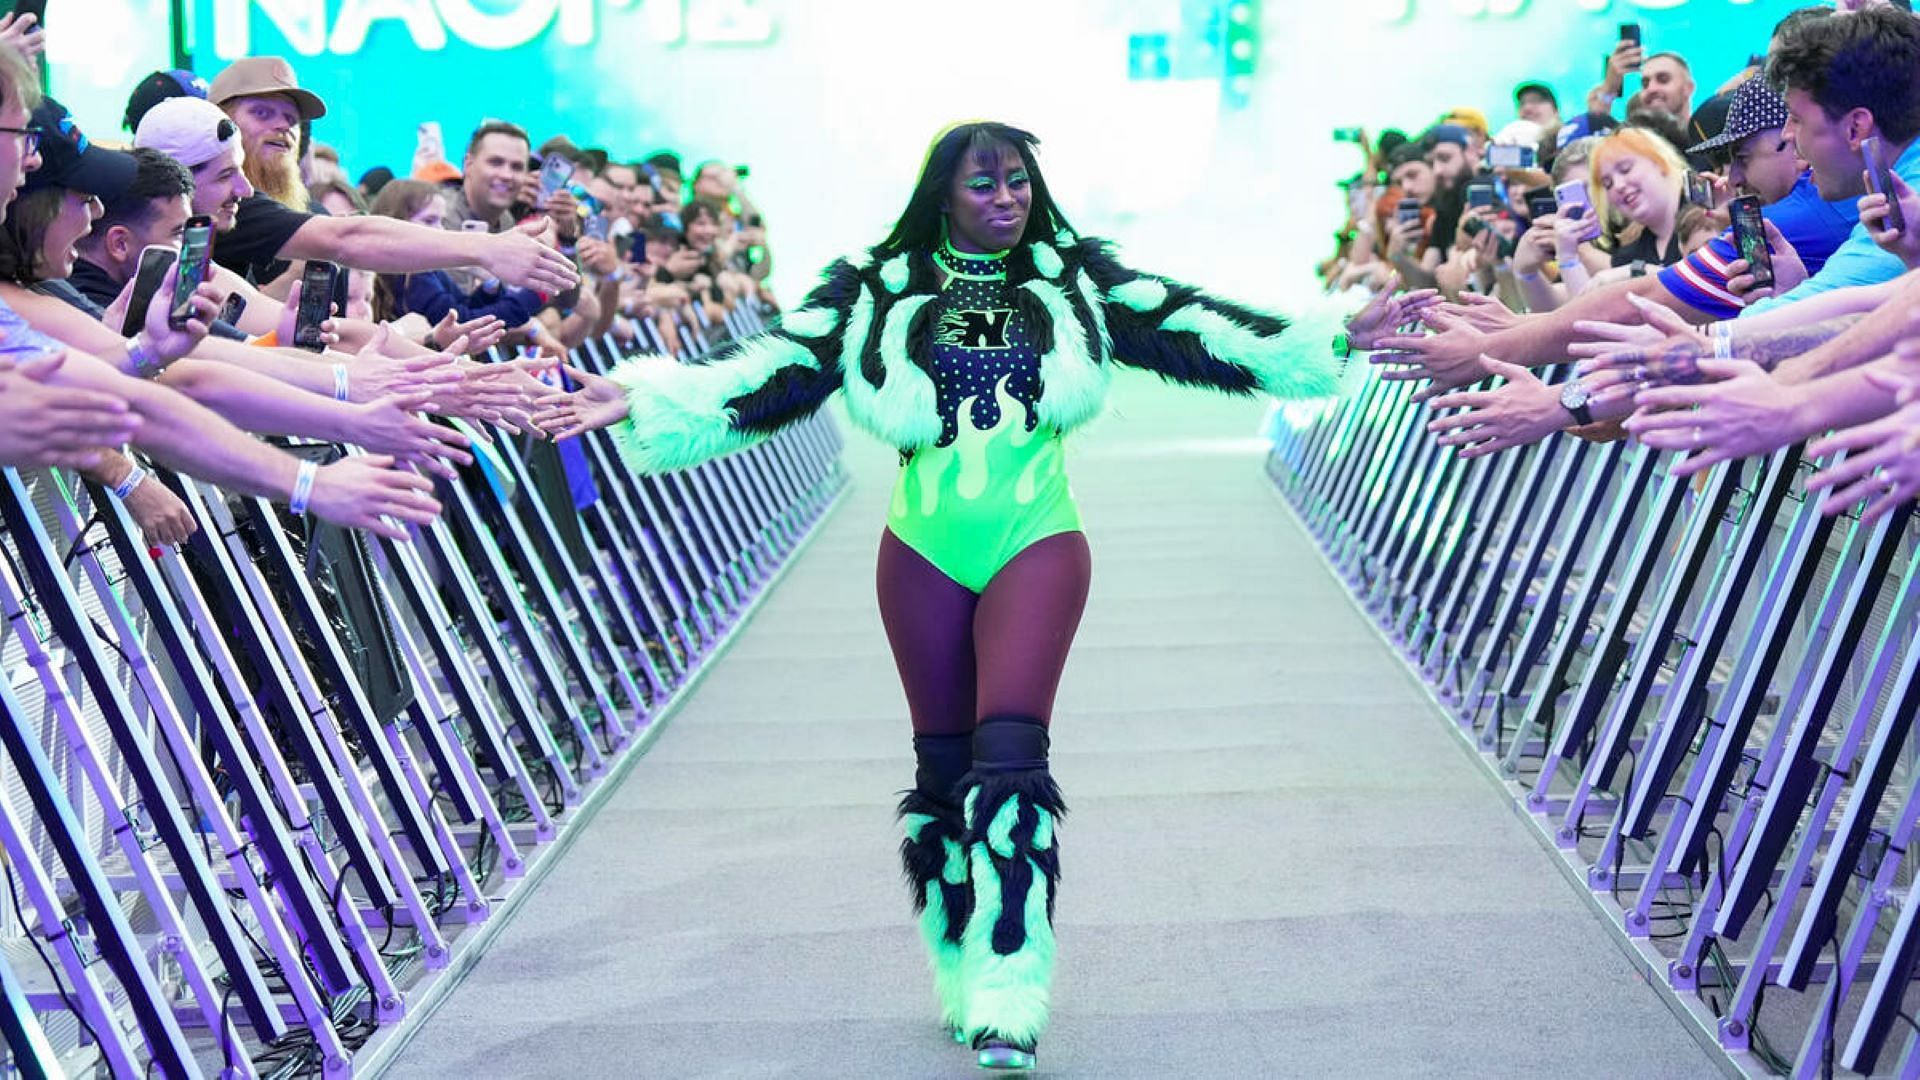 After two years away, Naomi came back to where her career began.